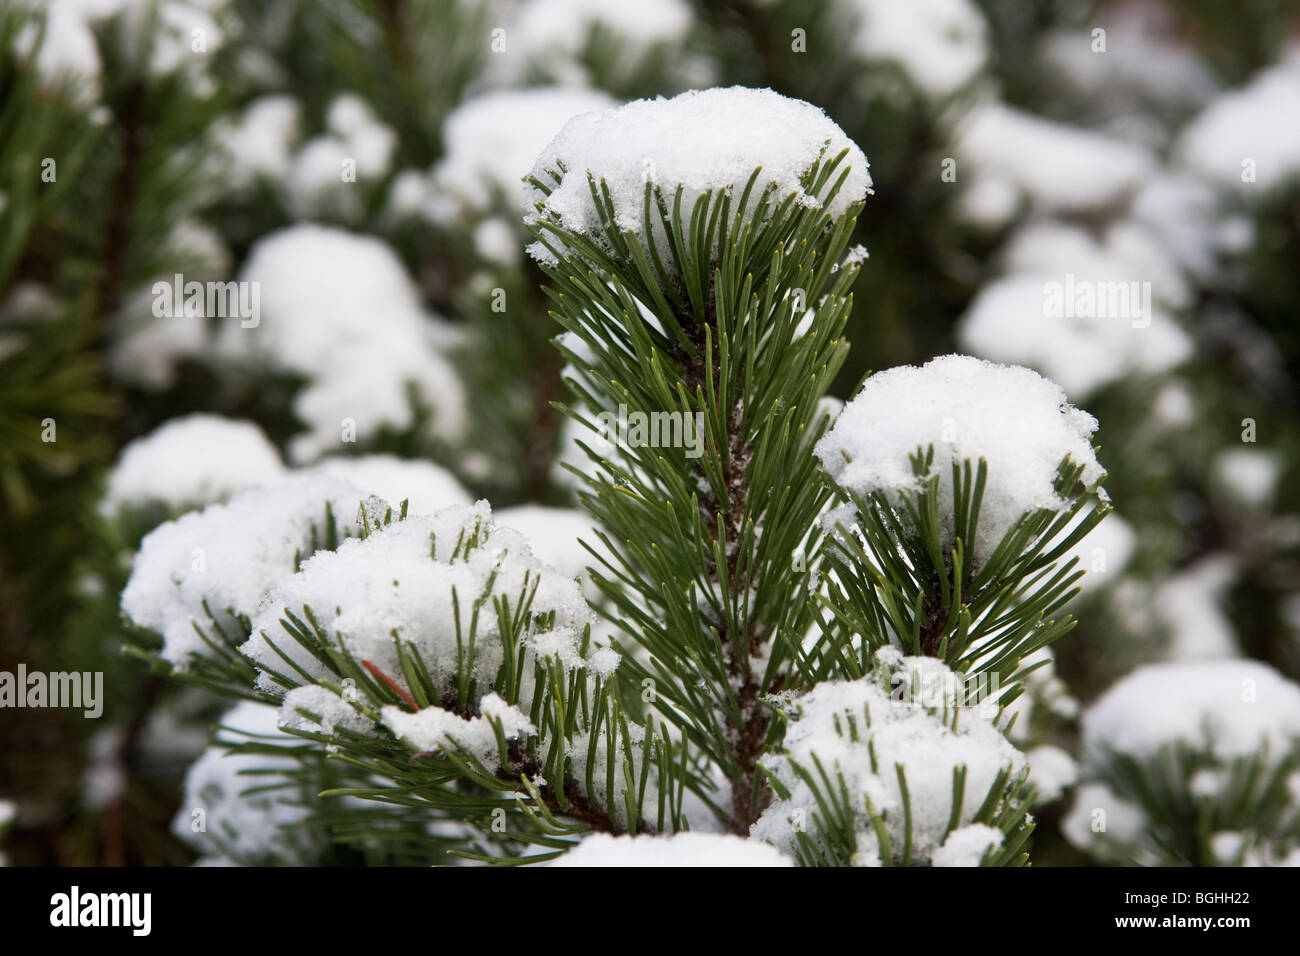 Closeup of a pine tree top covered with snow, winter forest landscape, Germany Stock Photo